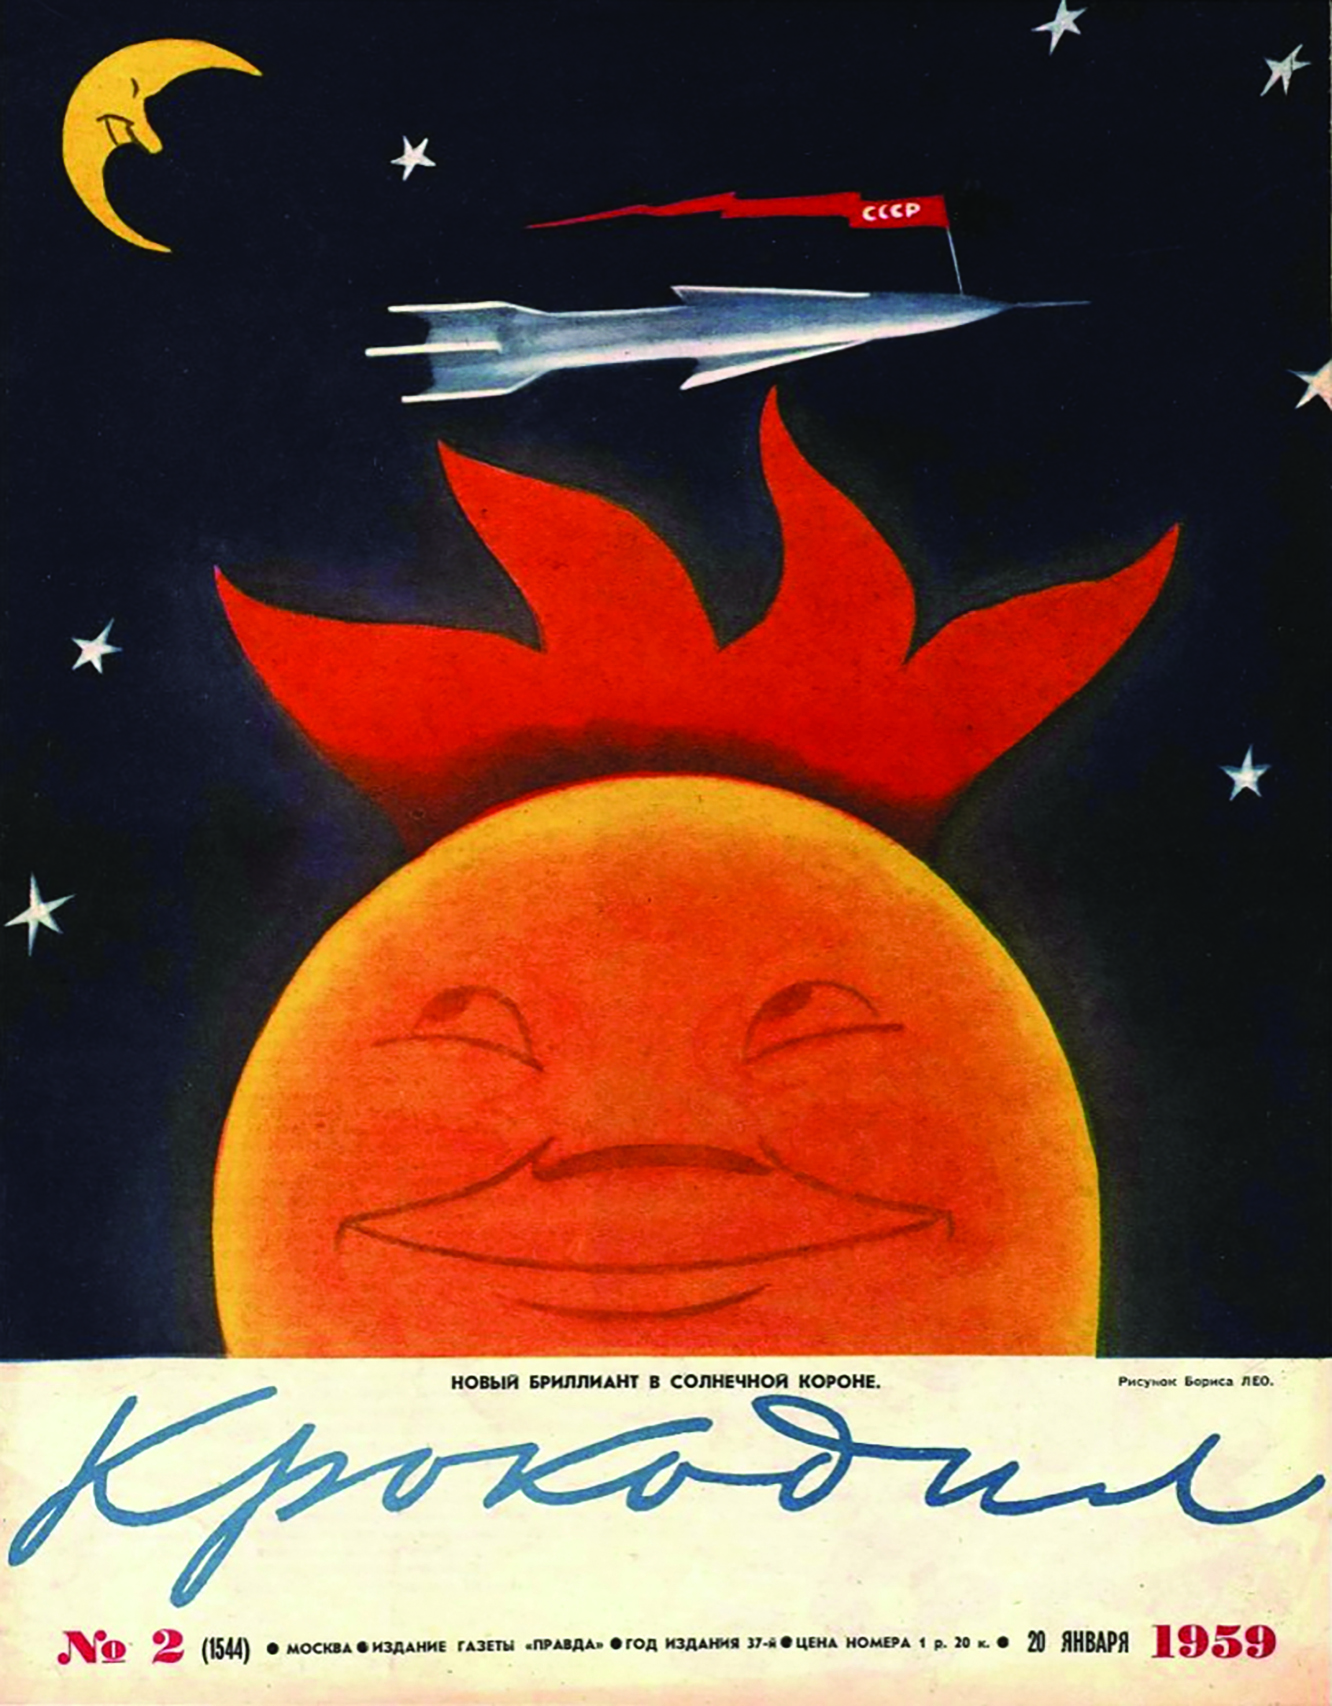 A smiling sun with a flaming red “crown” and a Soviet rocket circling around it.